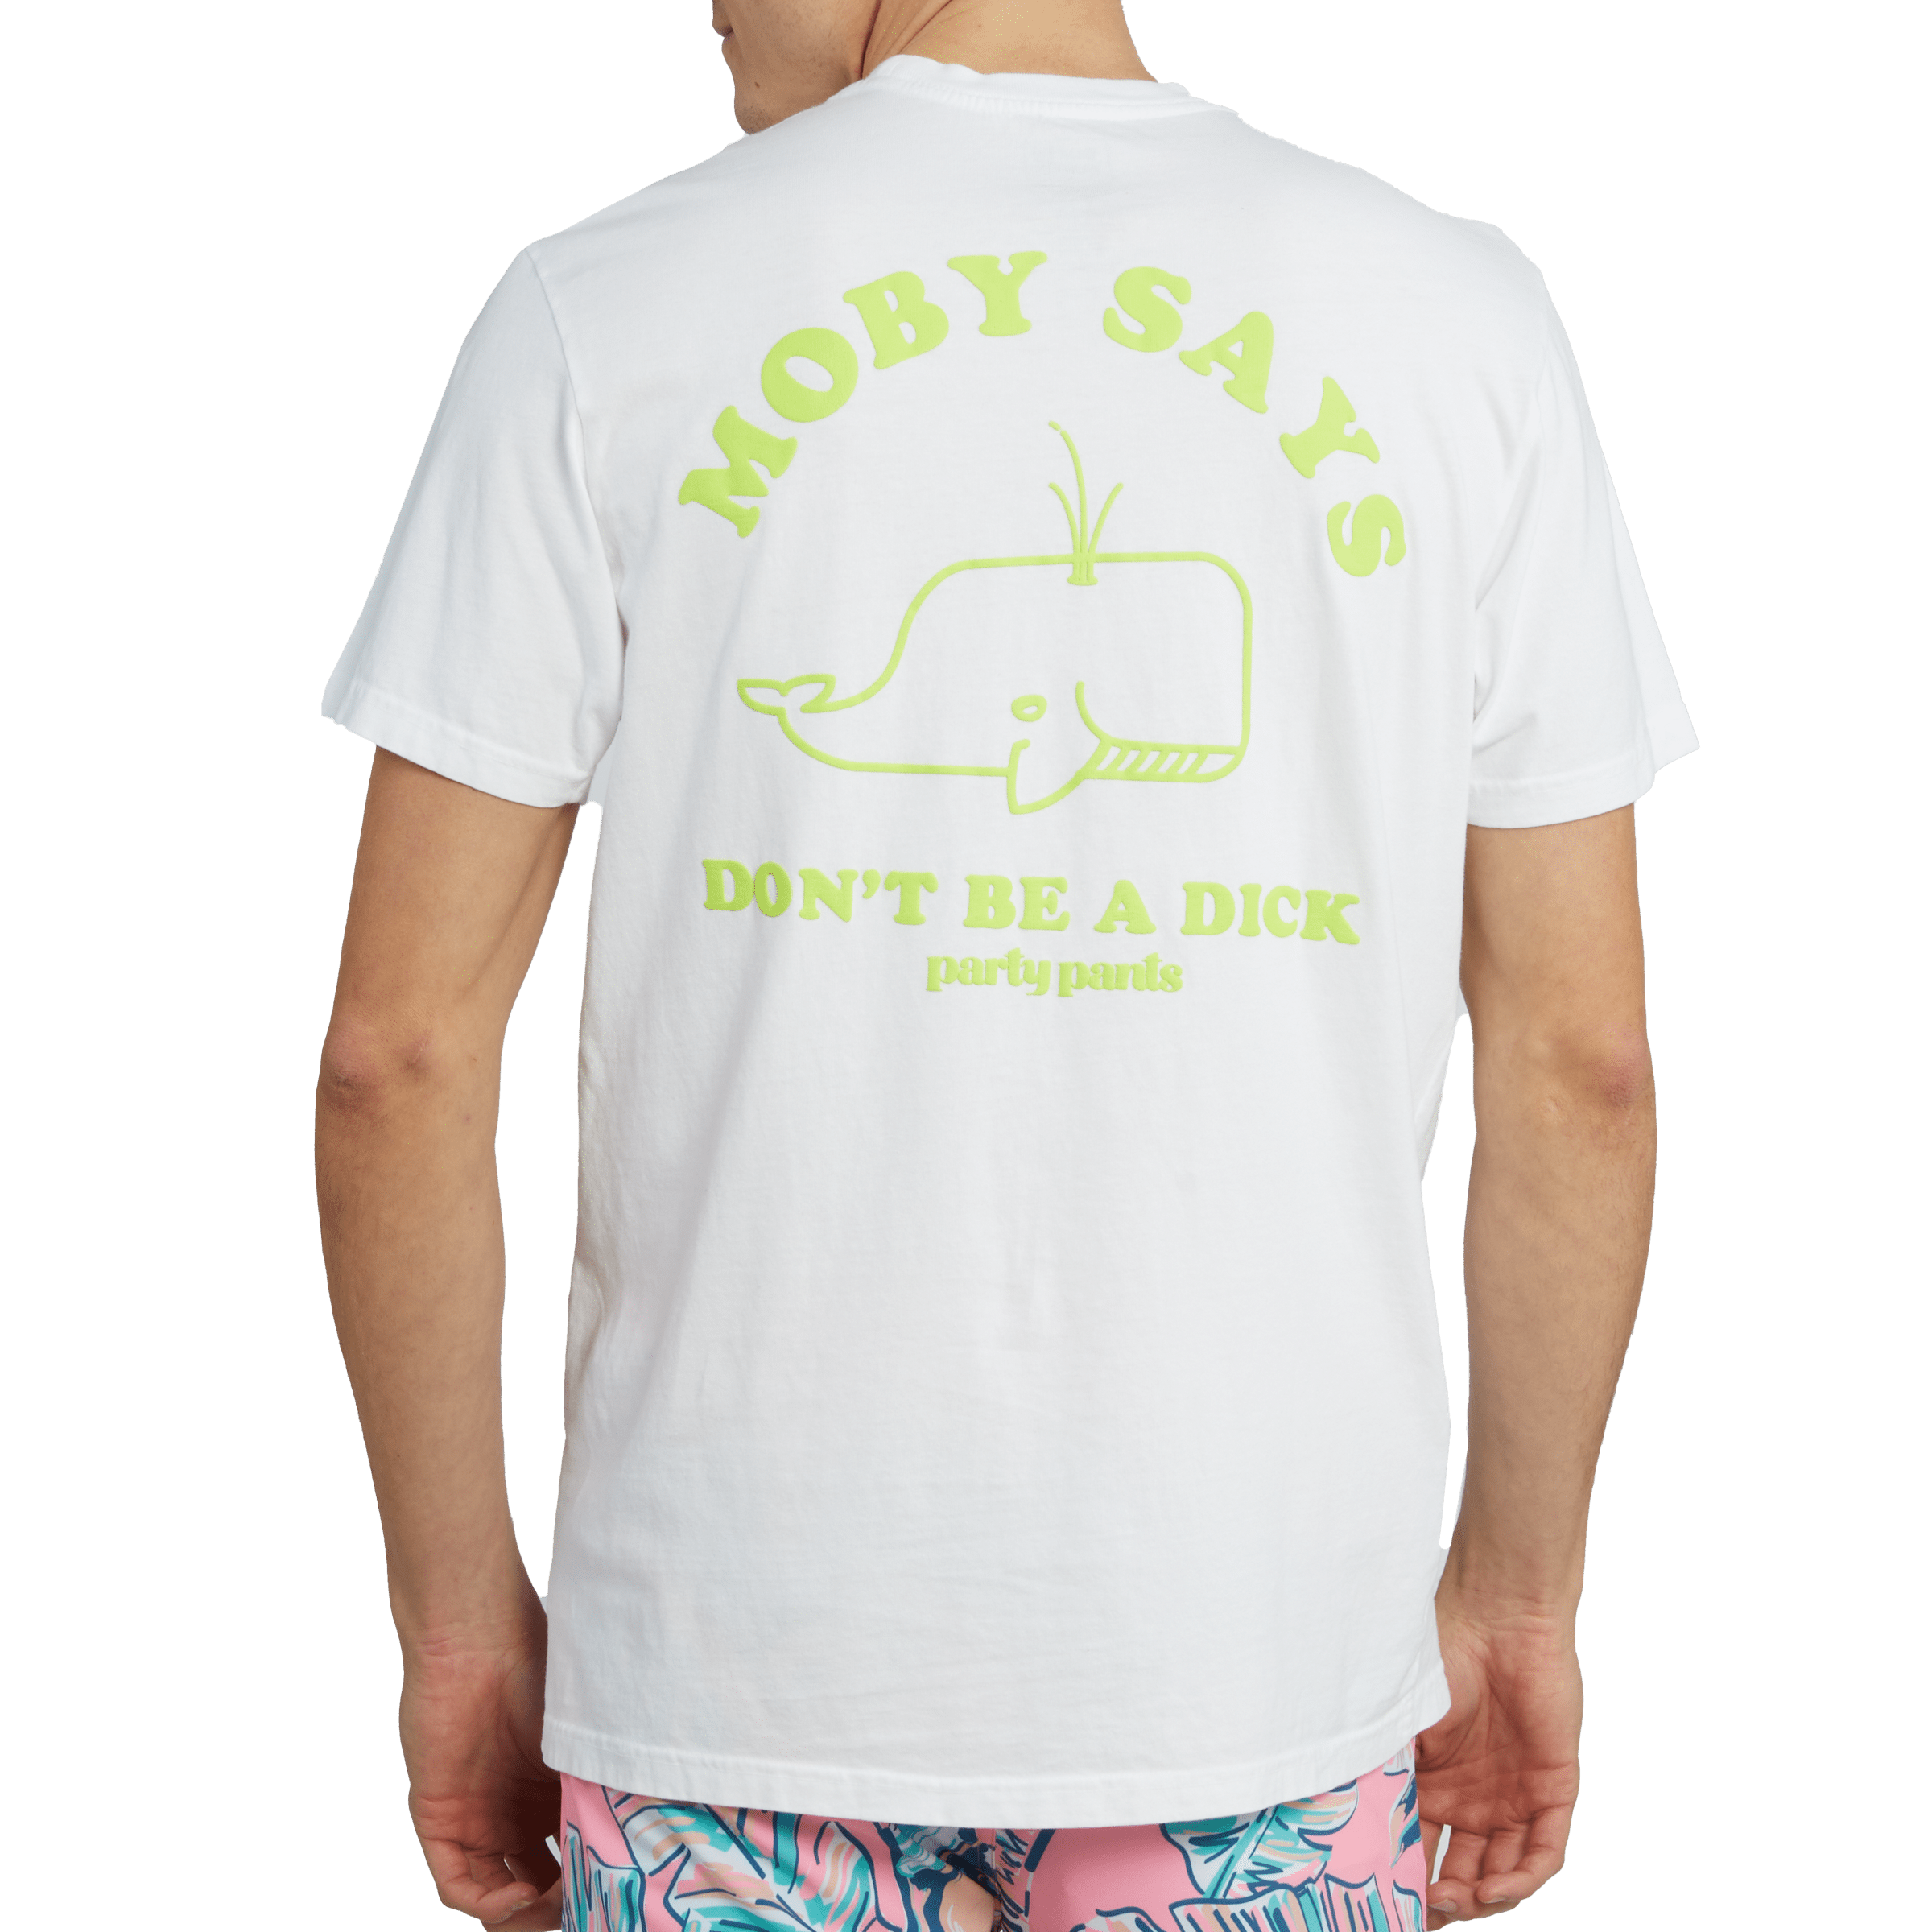 MOBY SAYS T-SHIRT - WHITE TEE PARTY PANTS 